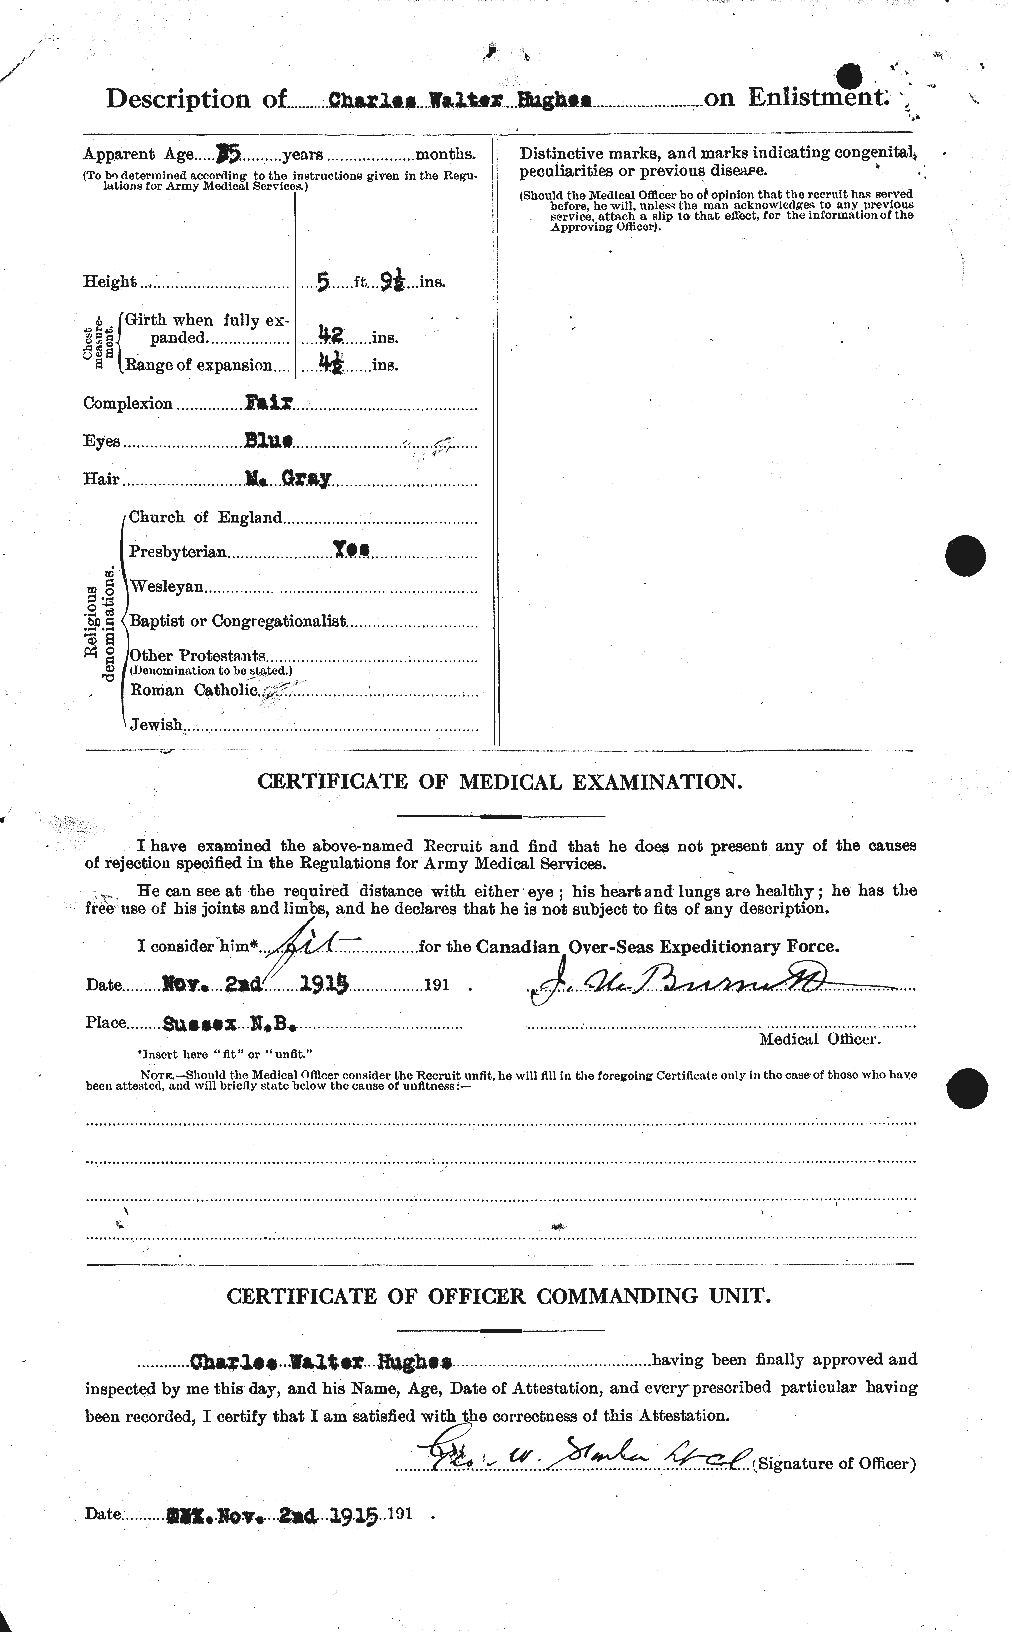 Personnel Records of the First World War - CEF 402615b